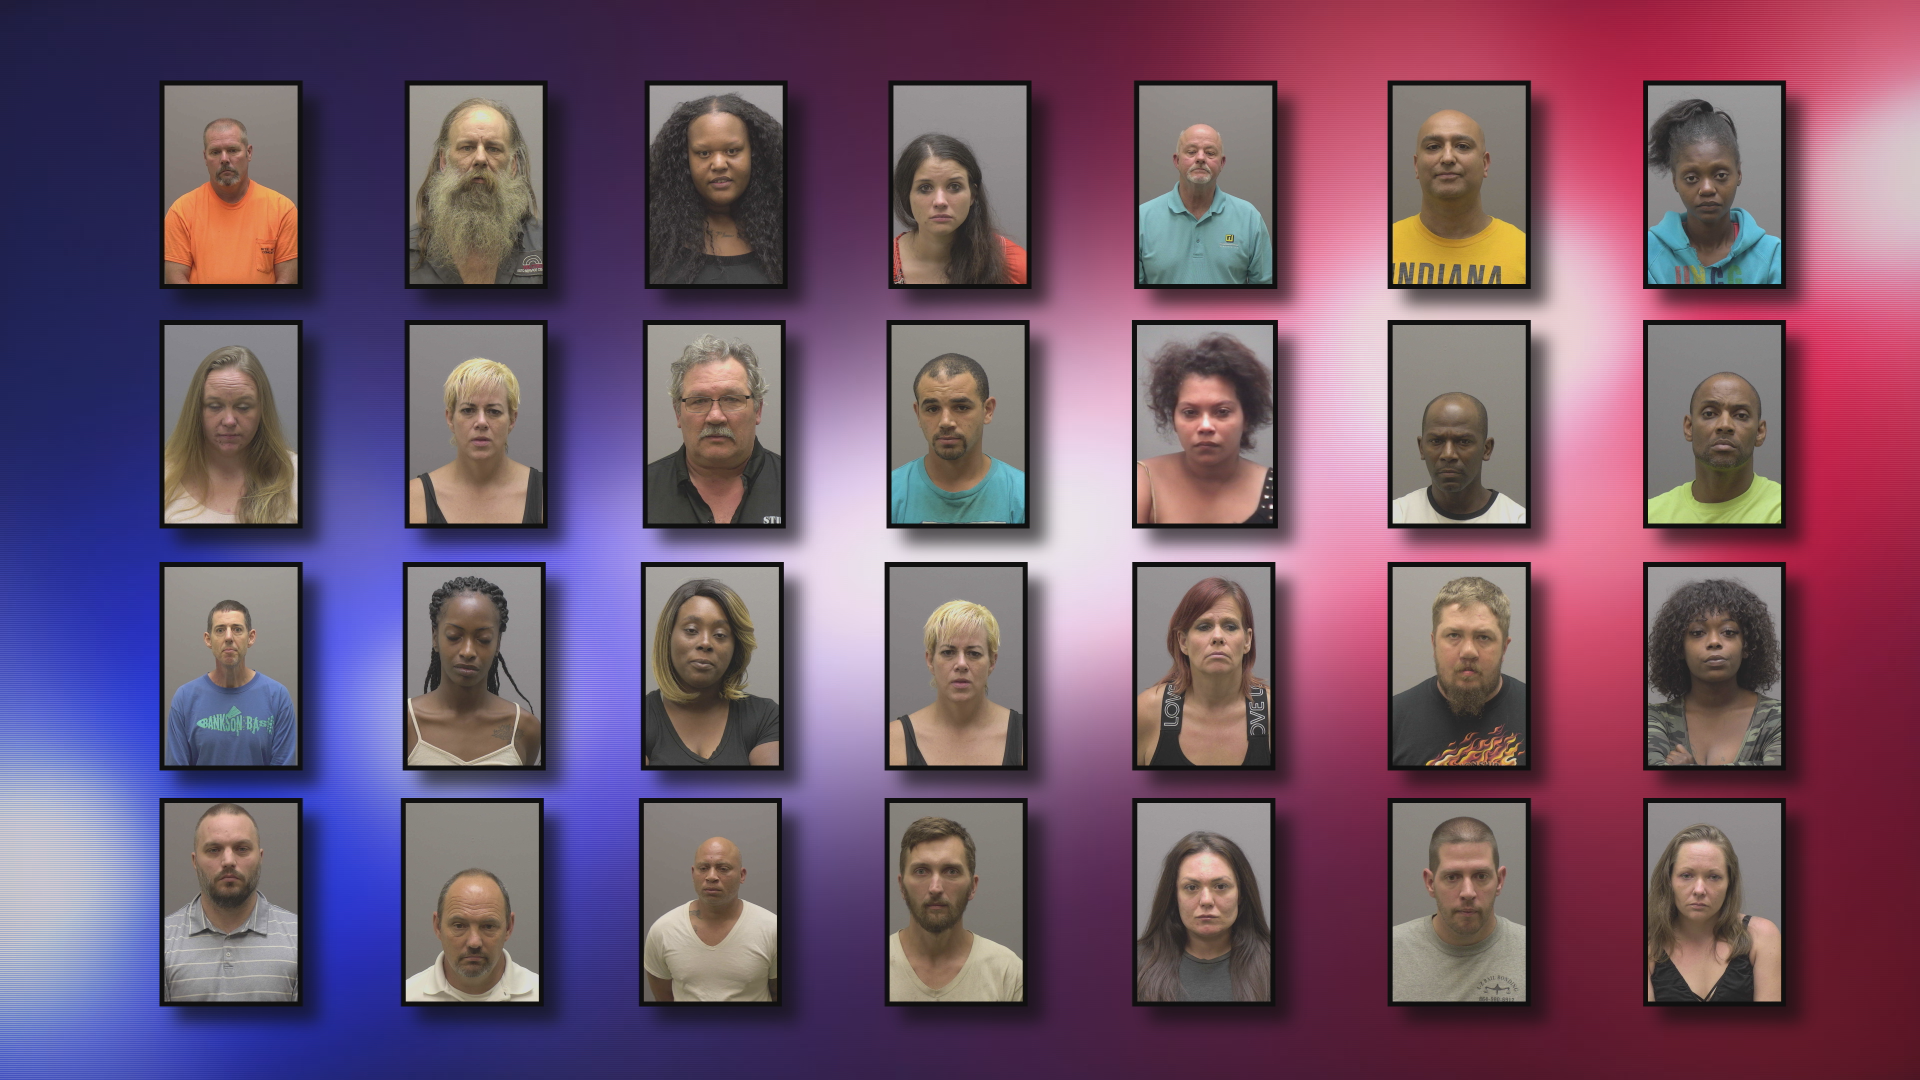 Operation End Of Summer 28 Arrested On Human Trafficking Charges In Alamance County 